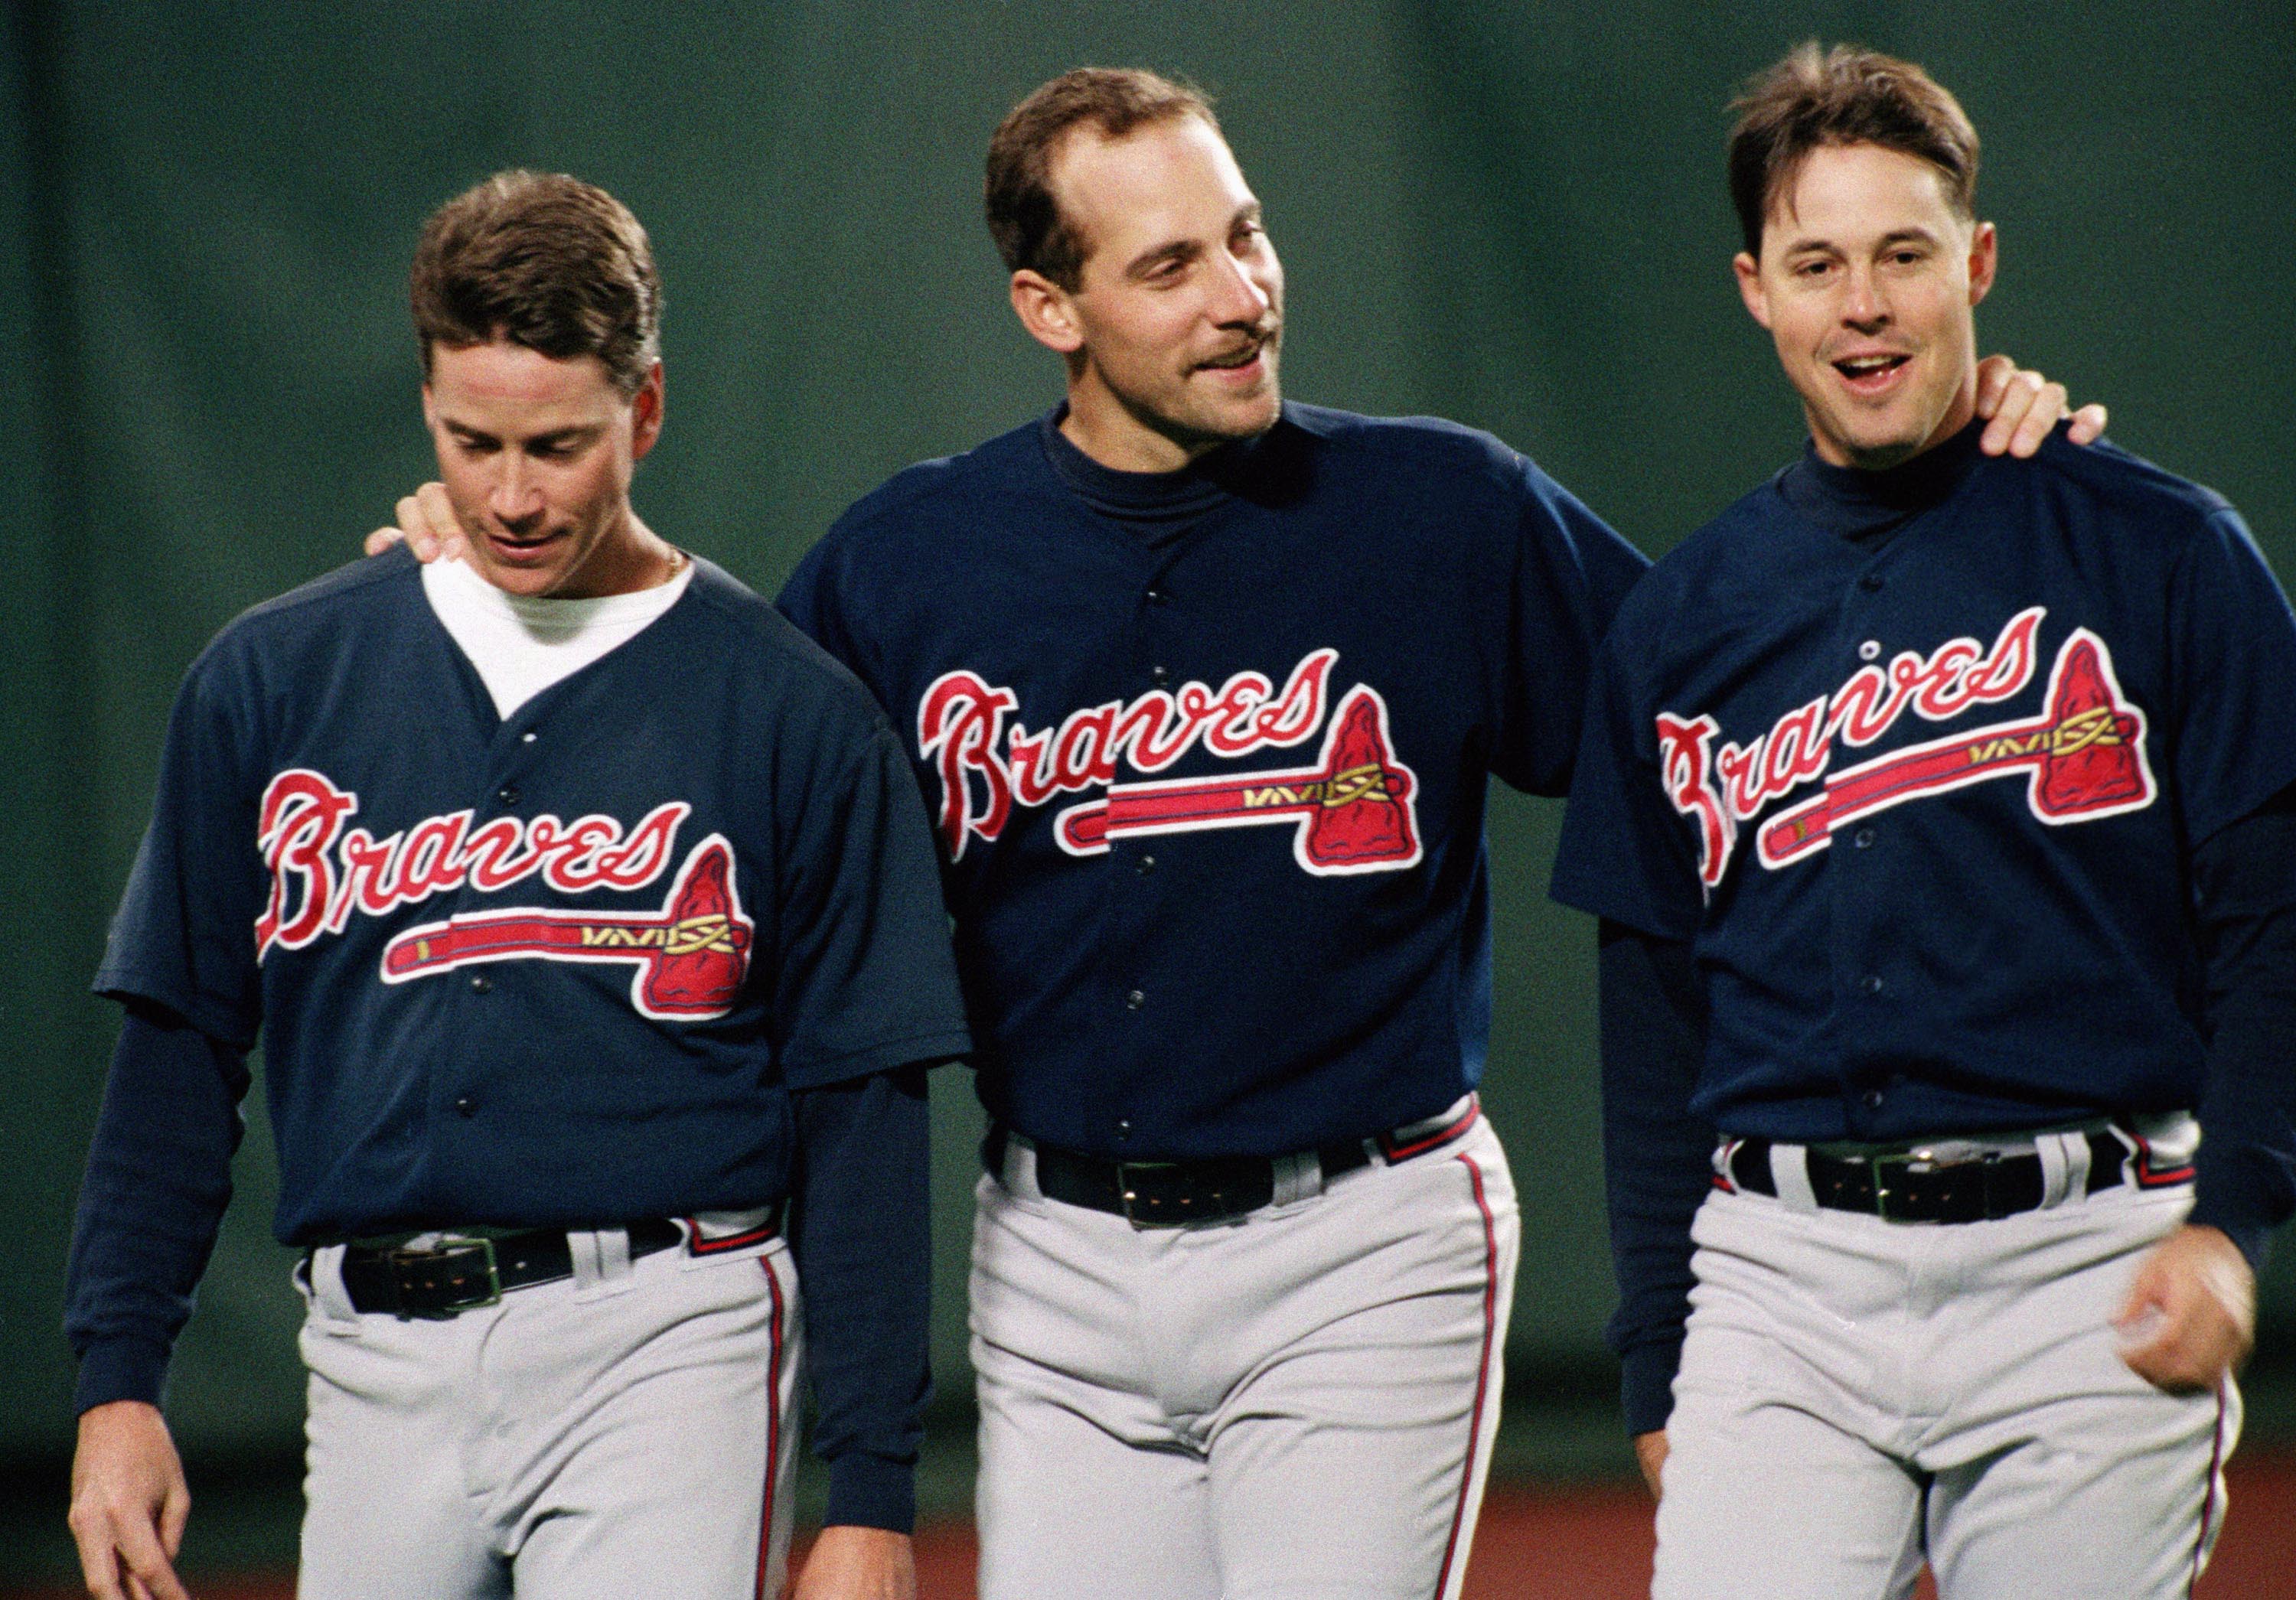 Q&A: John Smoltz, Greg Maddux, Tom Glavine on Big 3: Unlikely to be matched  - The Athletic